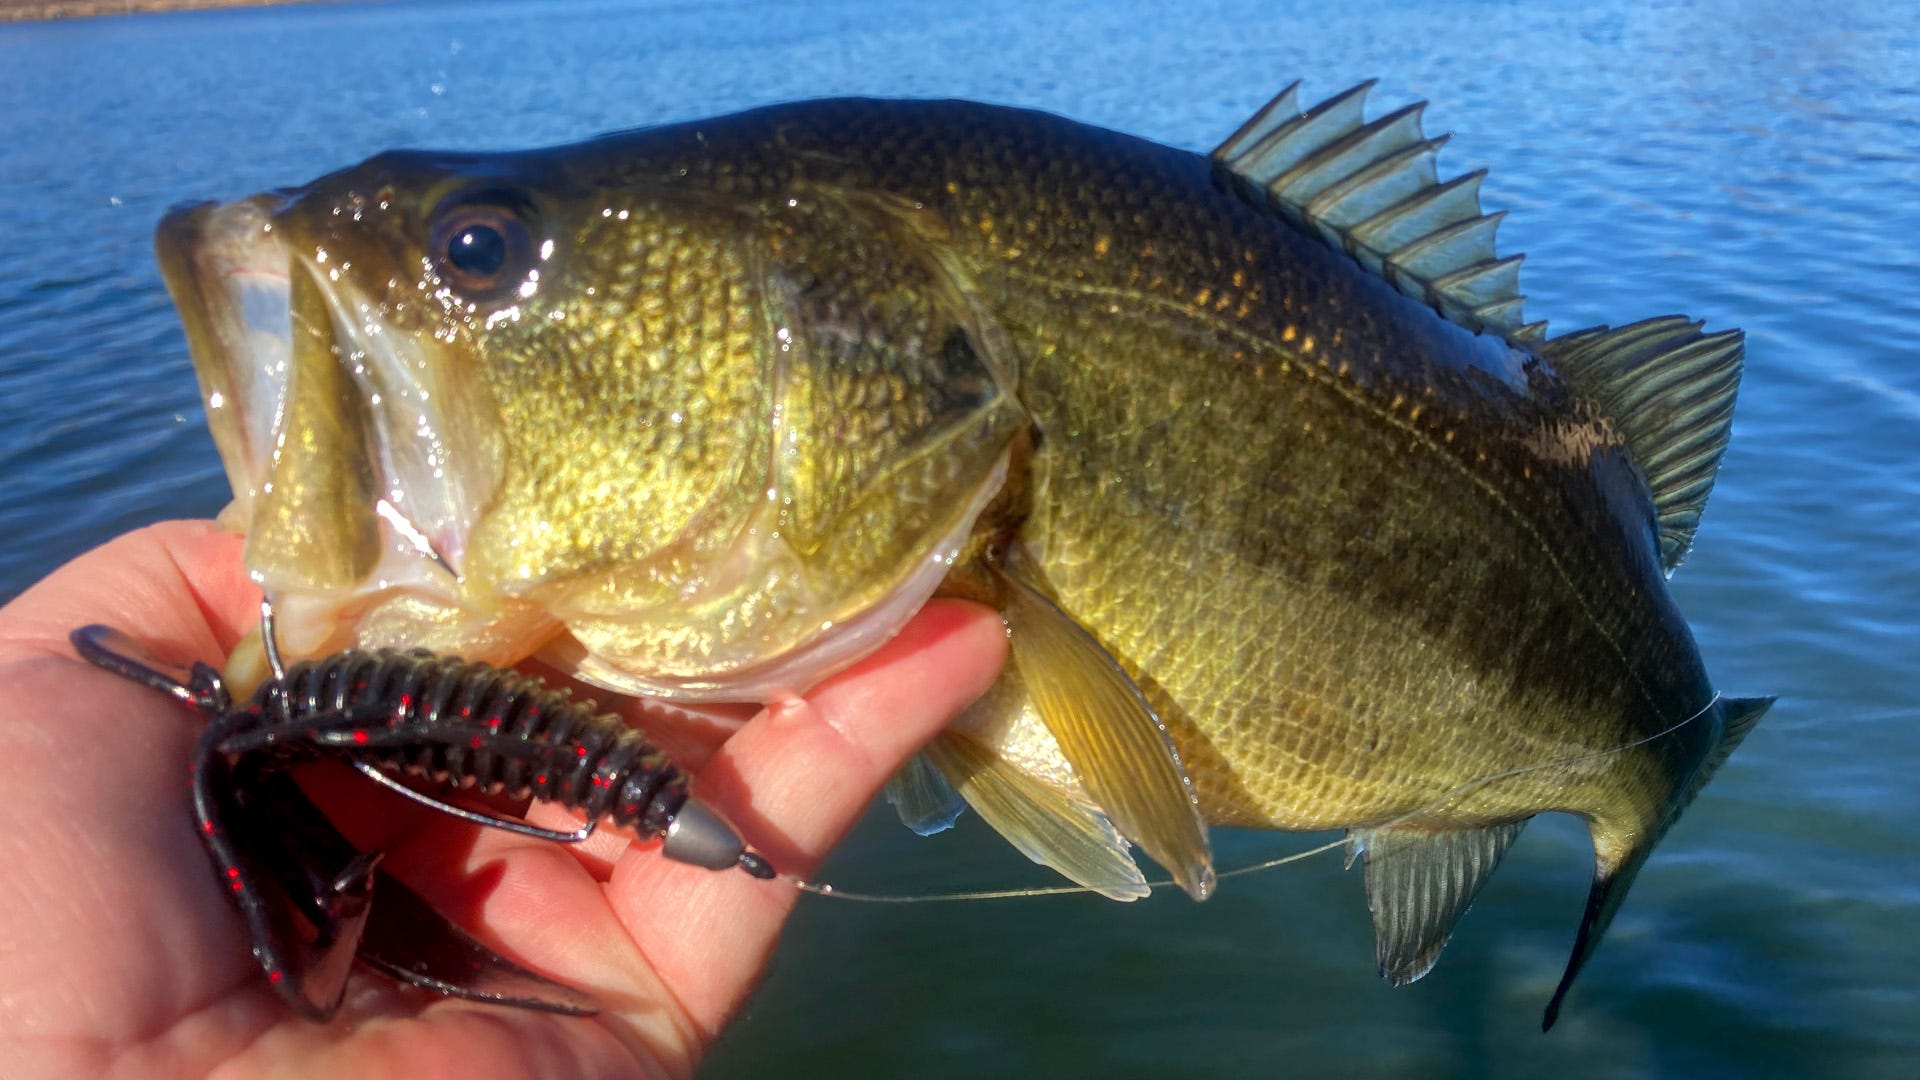 Largemouth bass: It's what we had for dinner